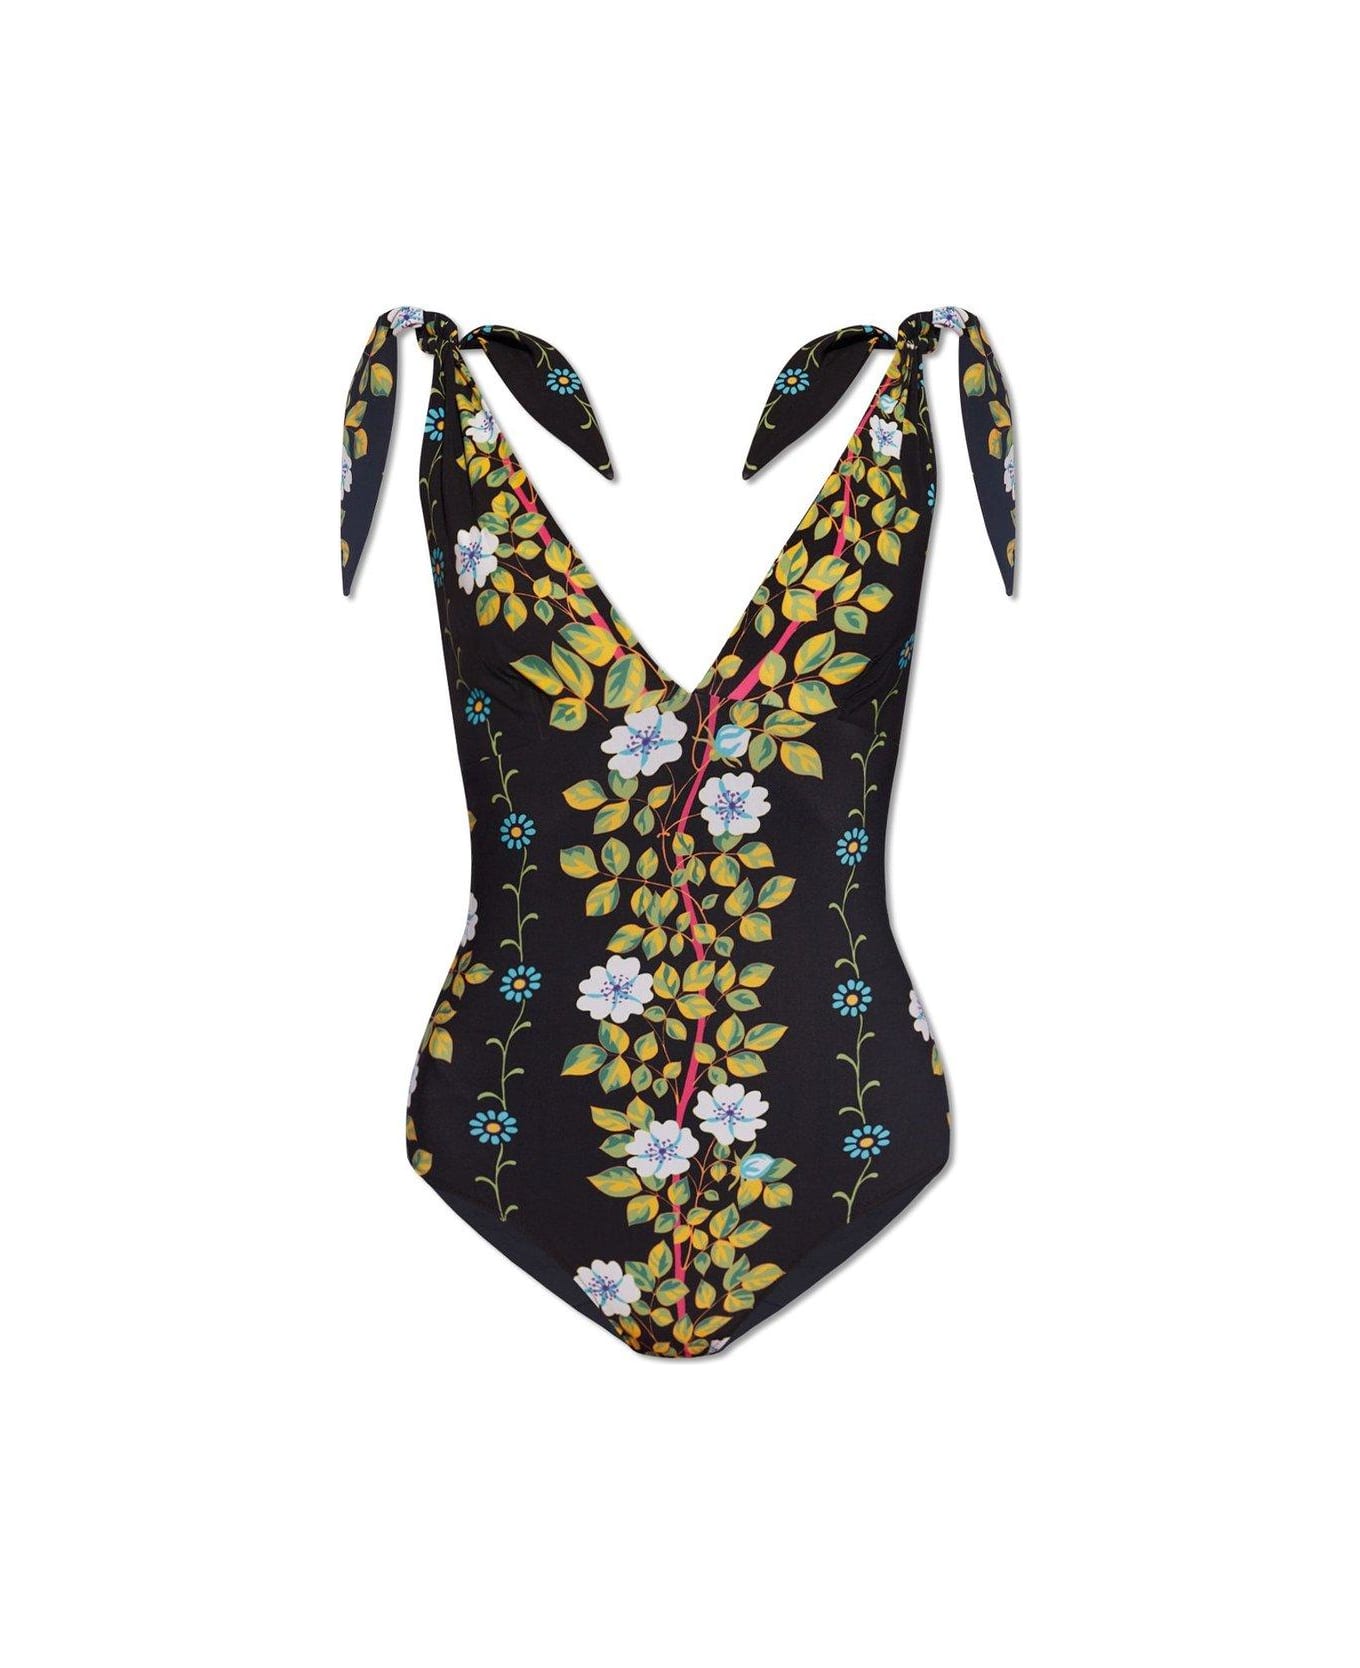 Etro Floral Printed One-piece Swimsuit - Black